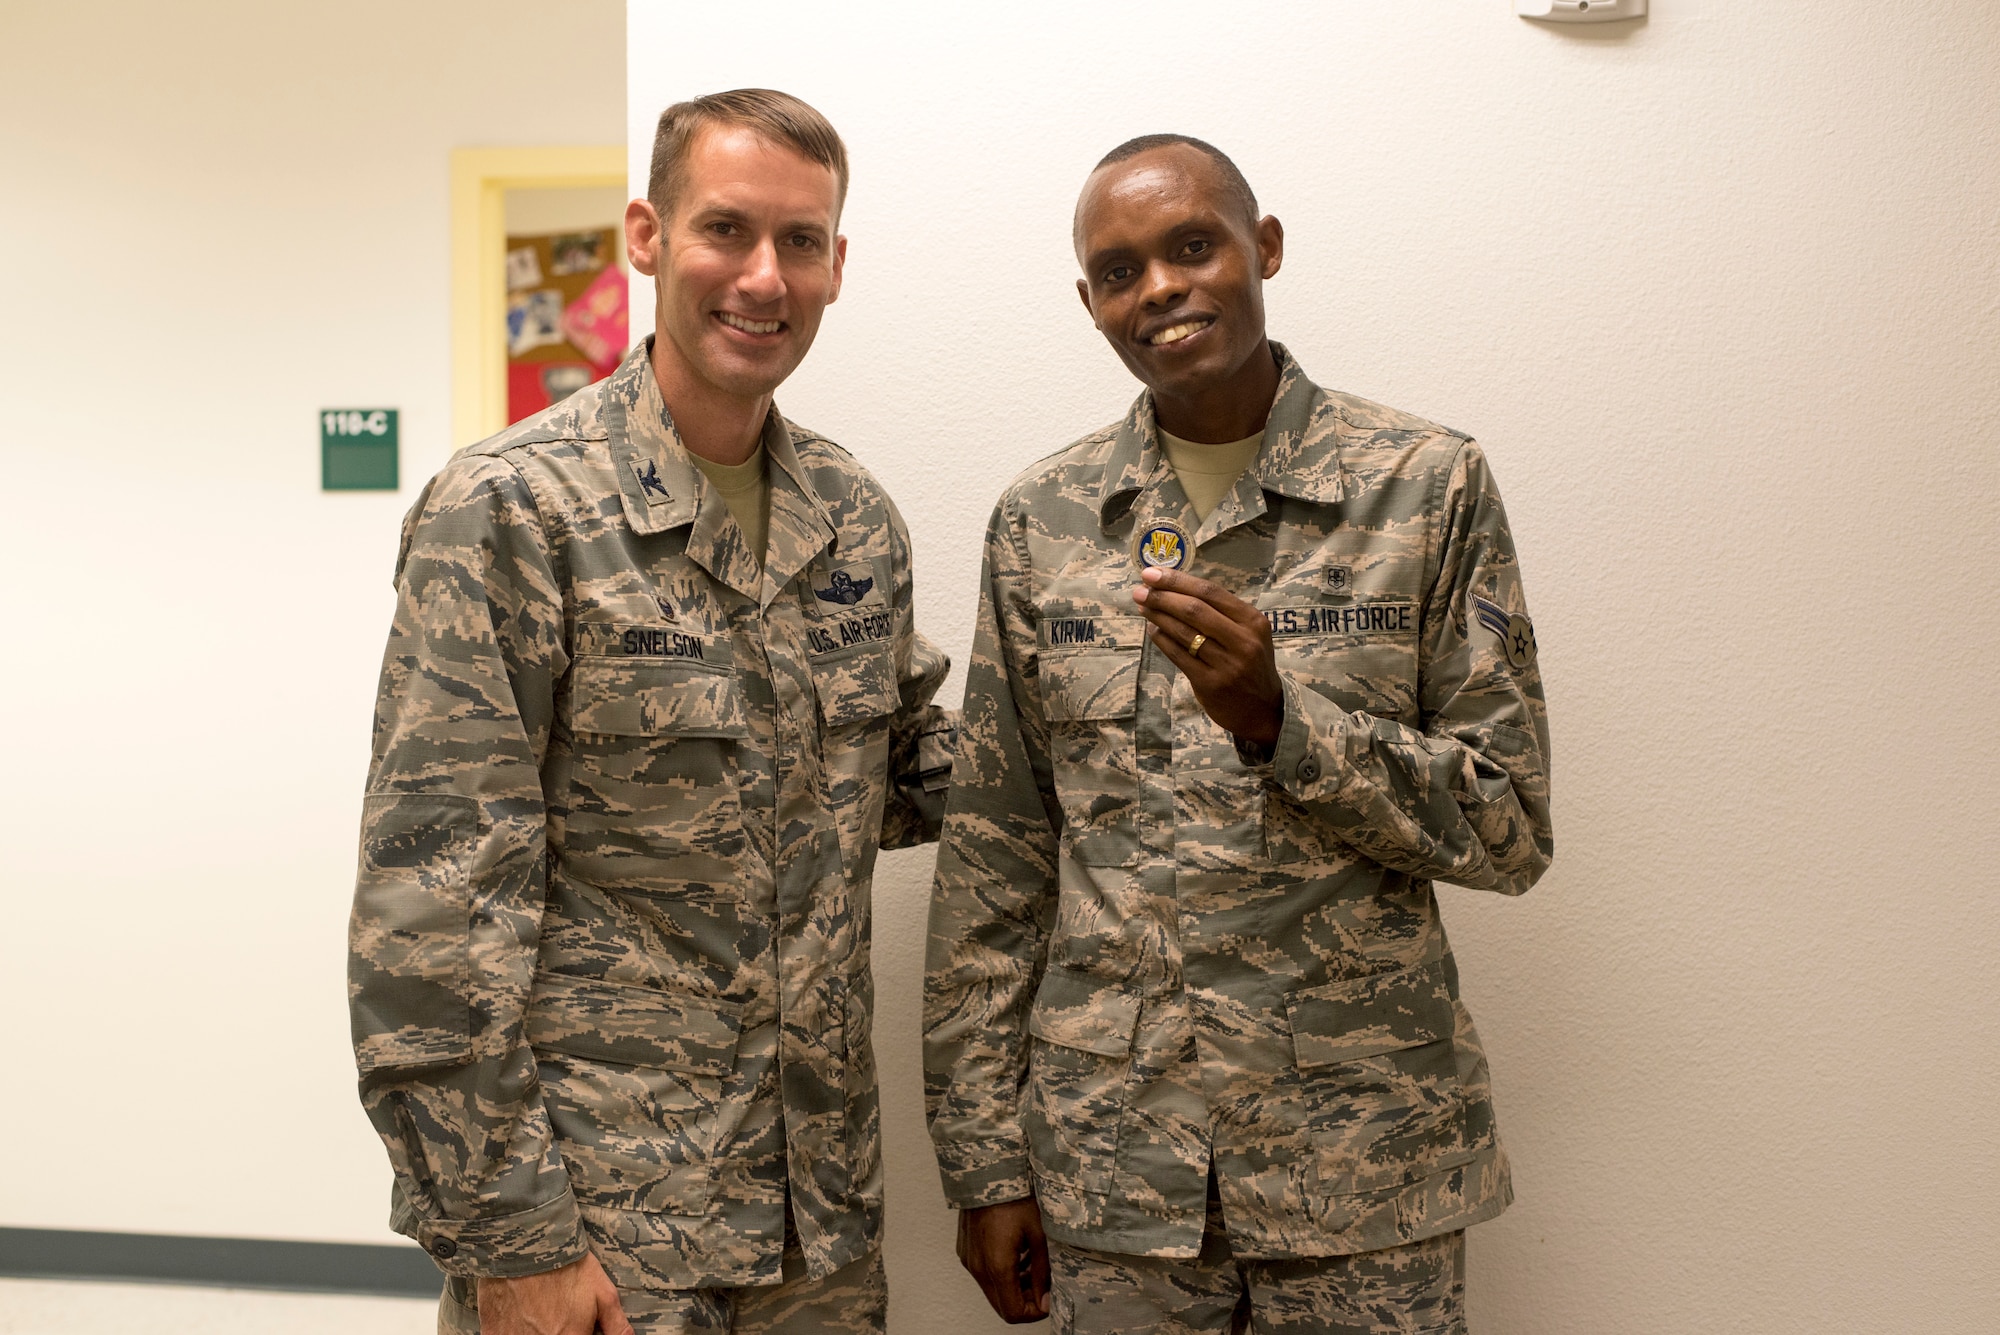 U.S. Air Force Col. Stephen Snelson, 6th Air Mobility Wing Commander, coins U.S. Air Force Airman 1st Class Daniel Kirwa, an aerospace medical technician assigned to the 6th Medical Operations Support Squadron, at MacDill Air Force Base's Brandon clinic, Fla., Oct. 11, 2018